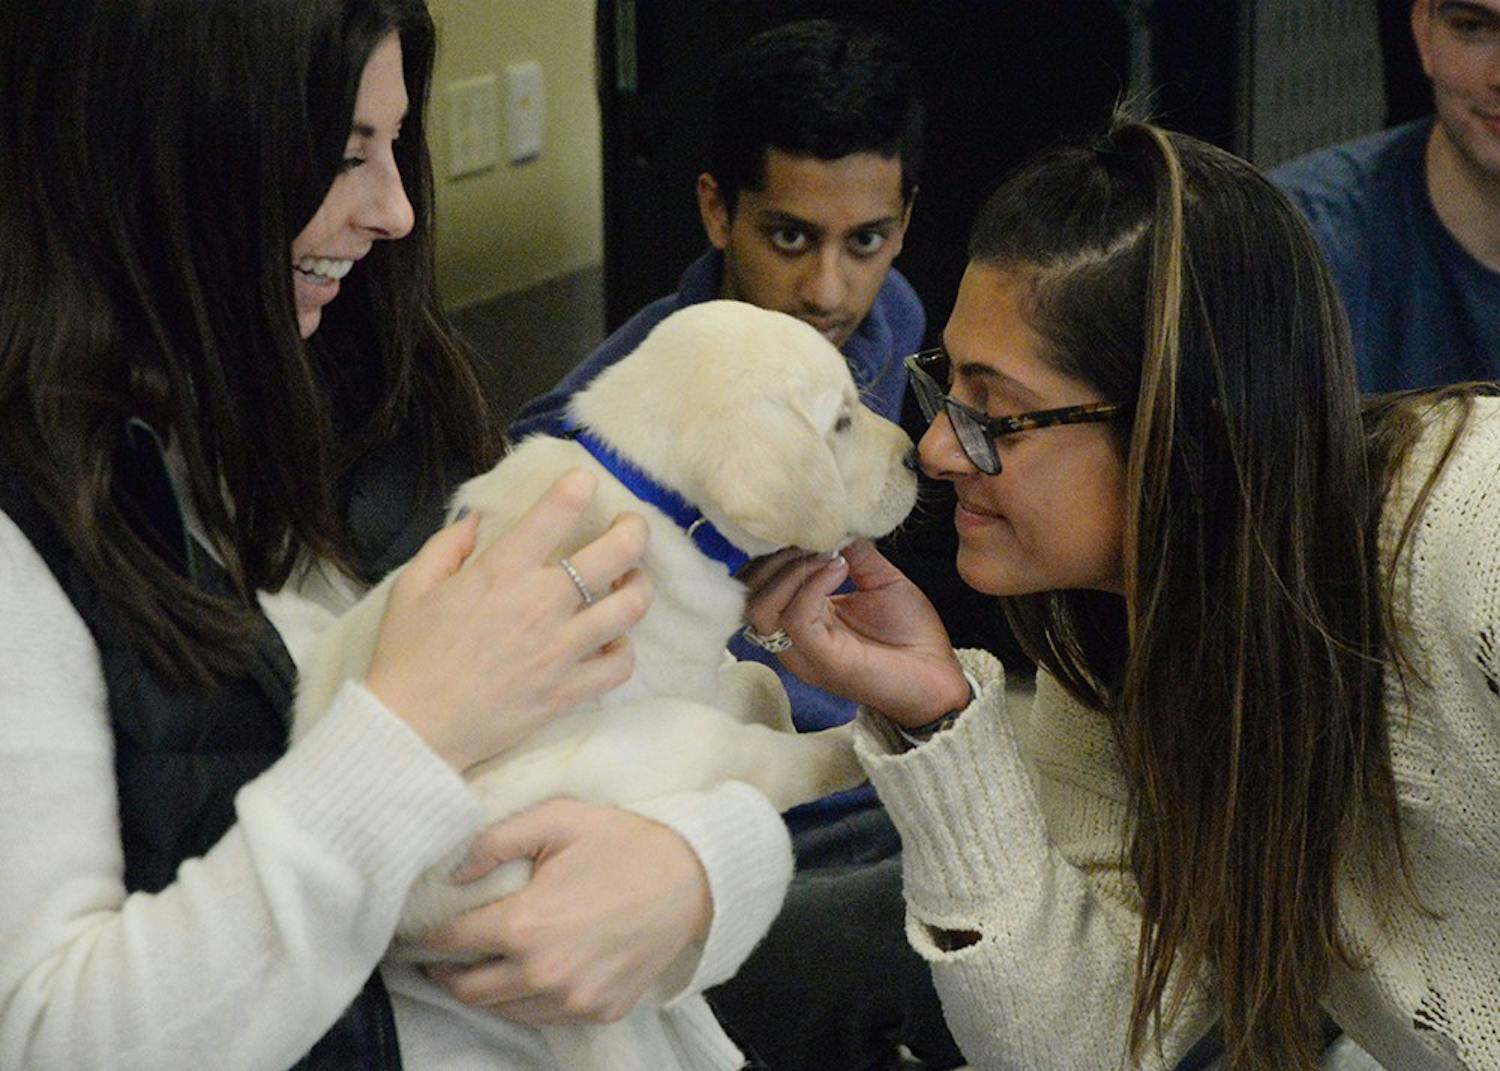 GALLERY: Students play with puppies to destress before finals